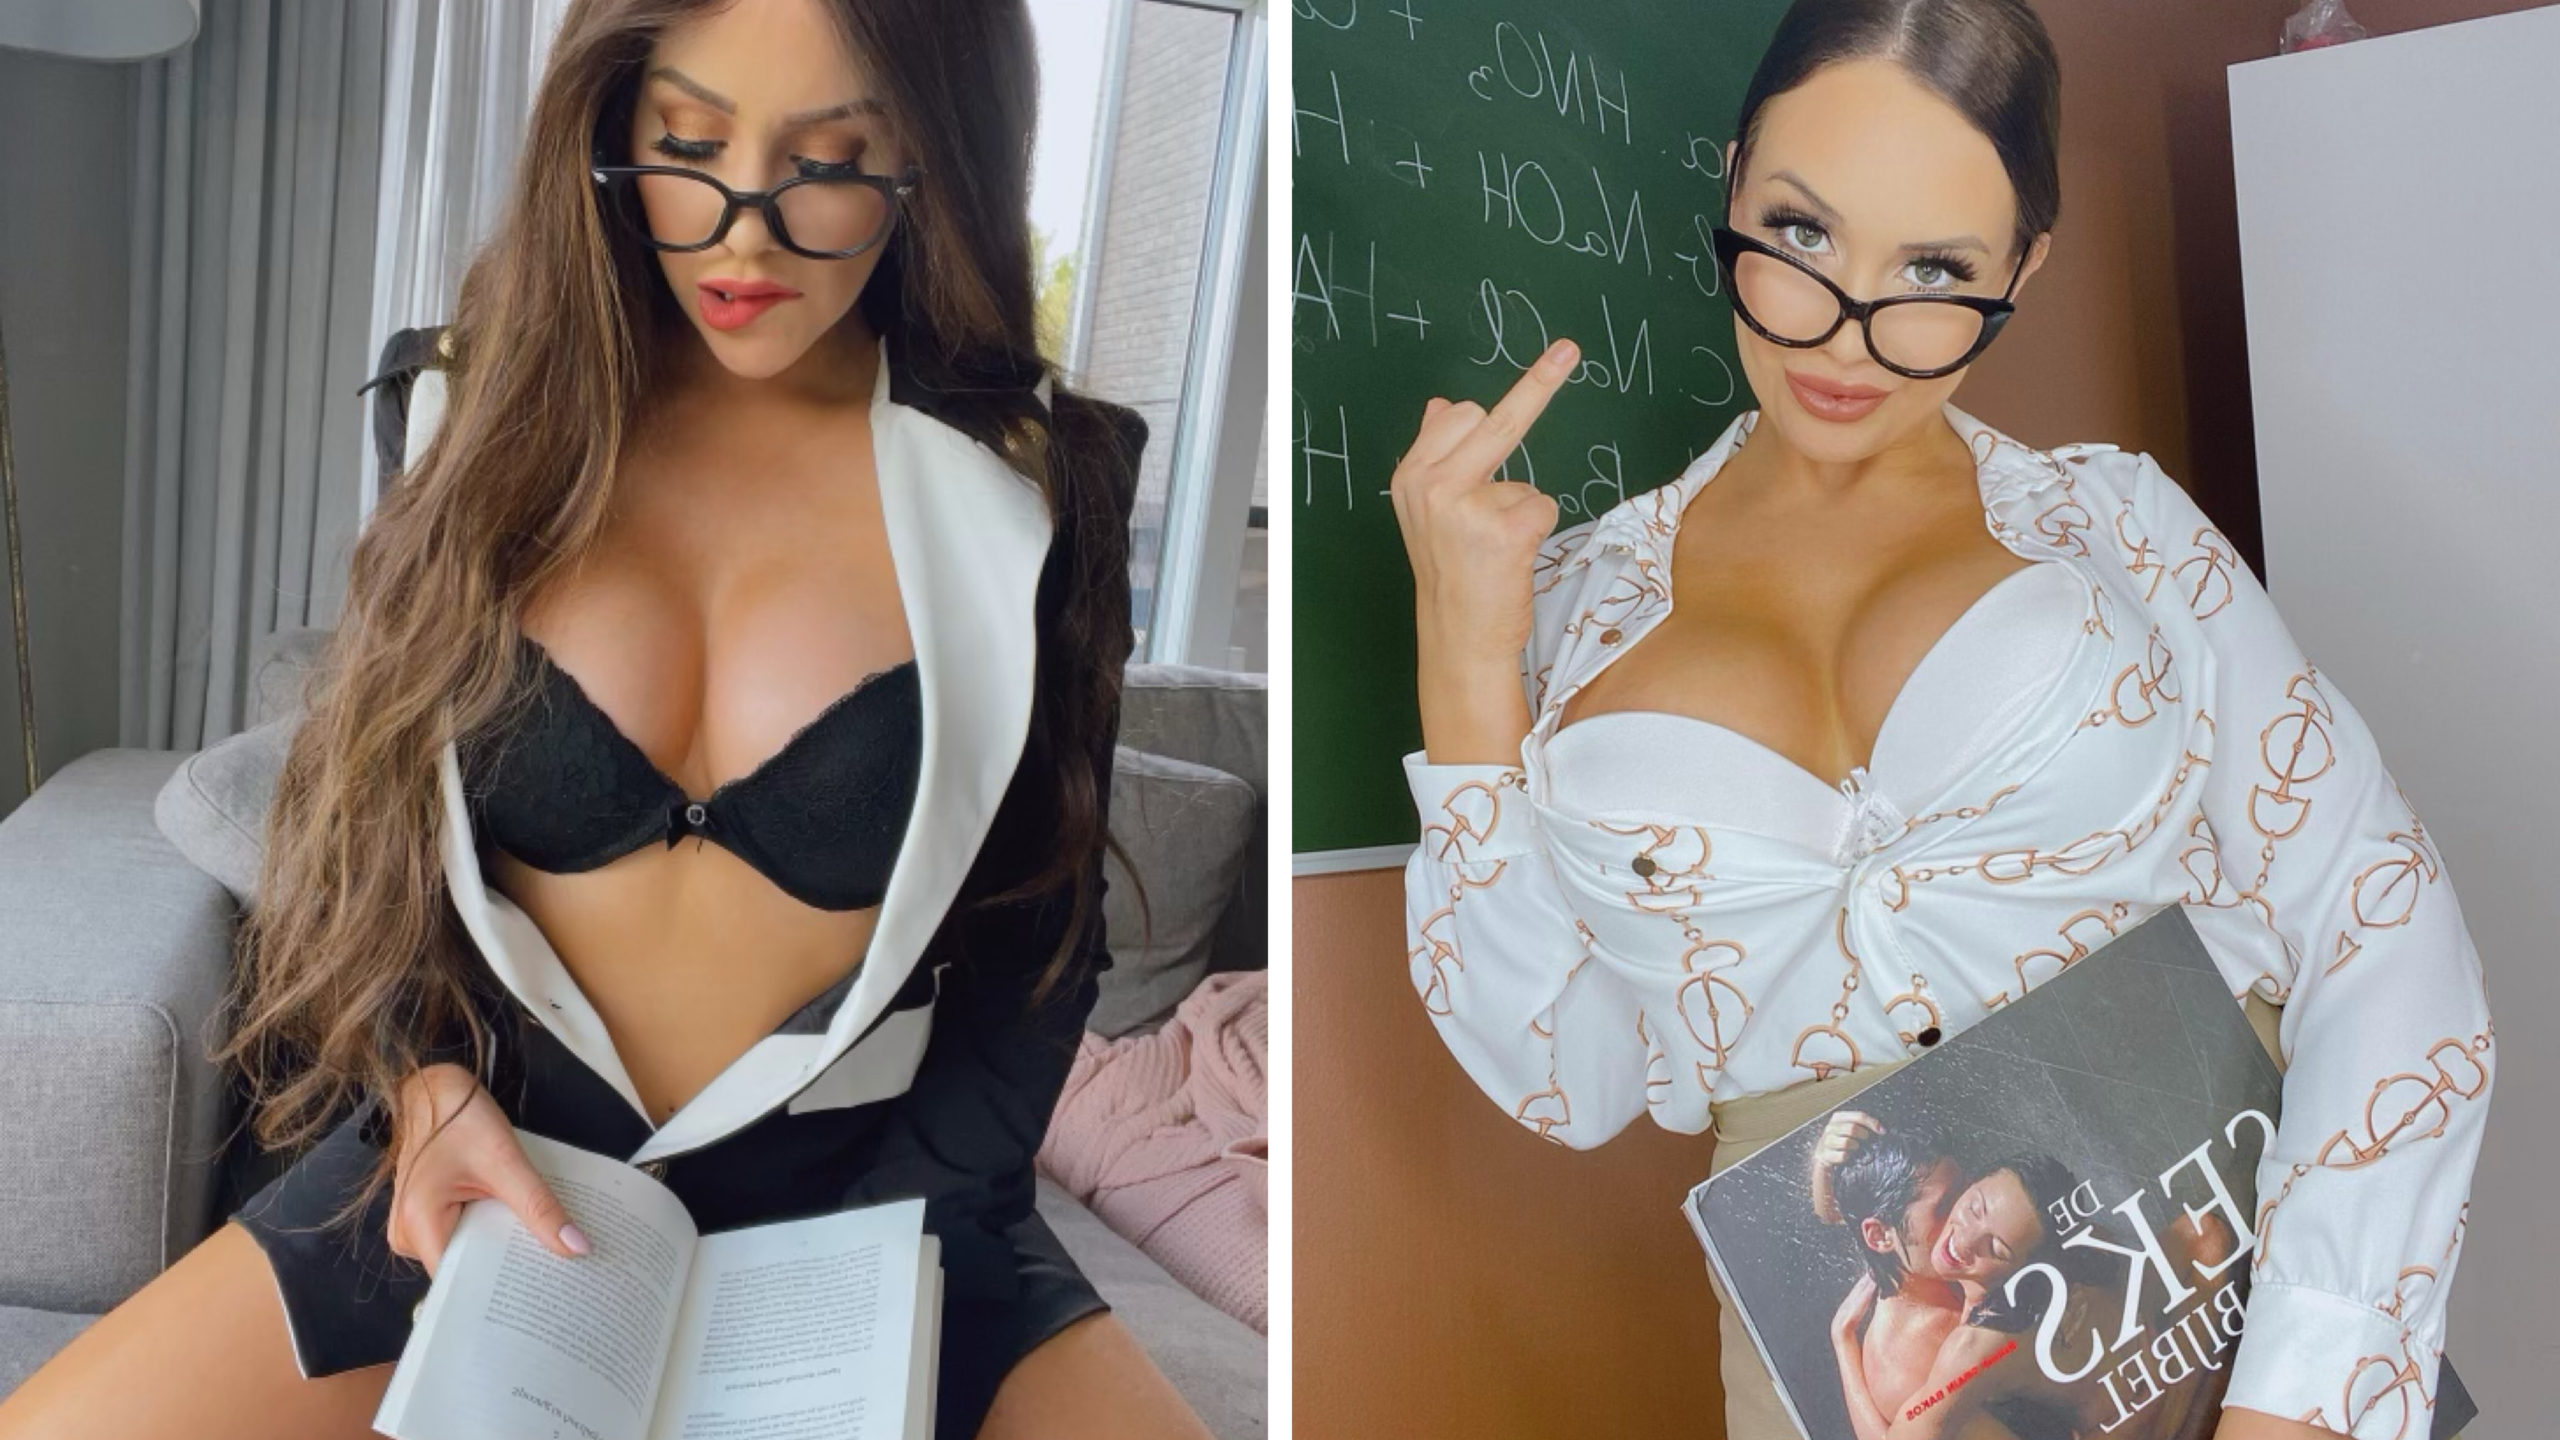 Teacher FIRED After OnlyFans Clip With Student Goes Viral This teacher had ...